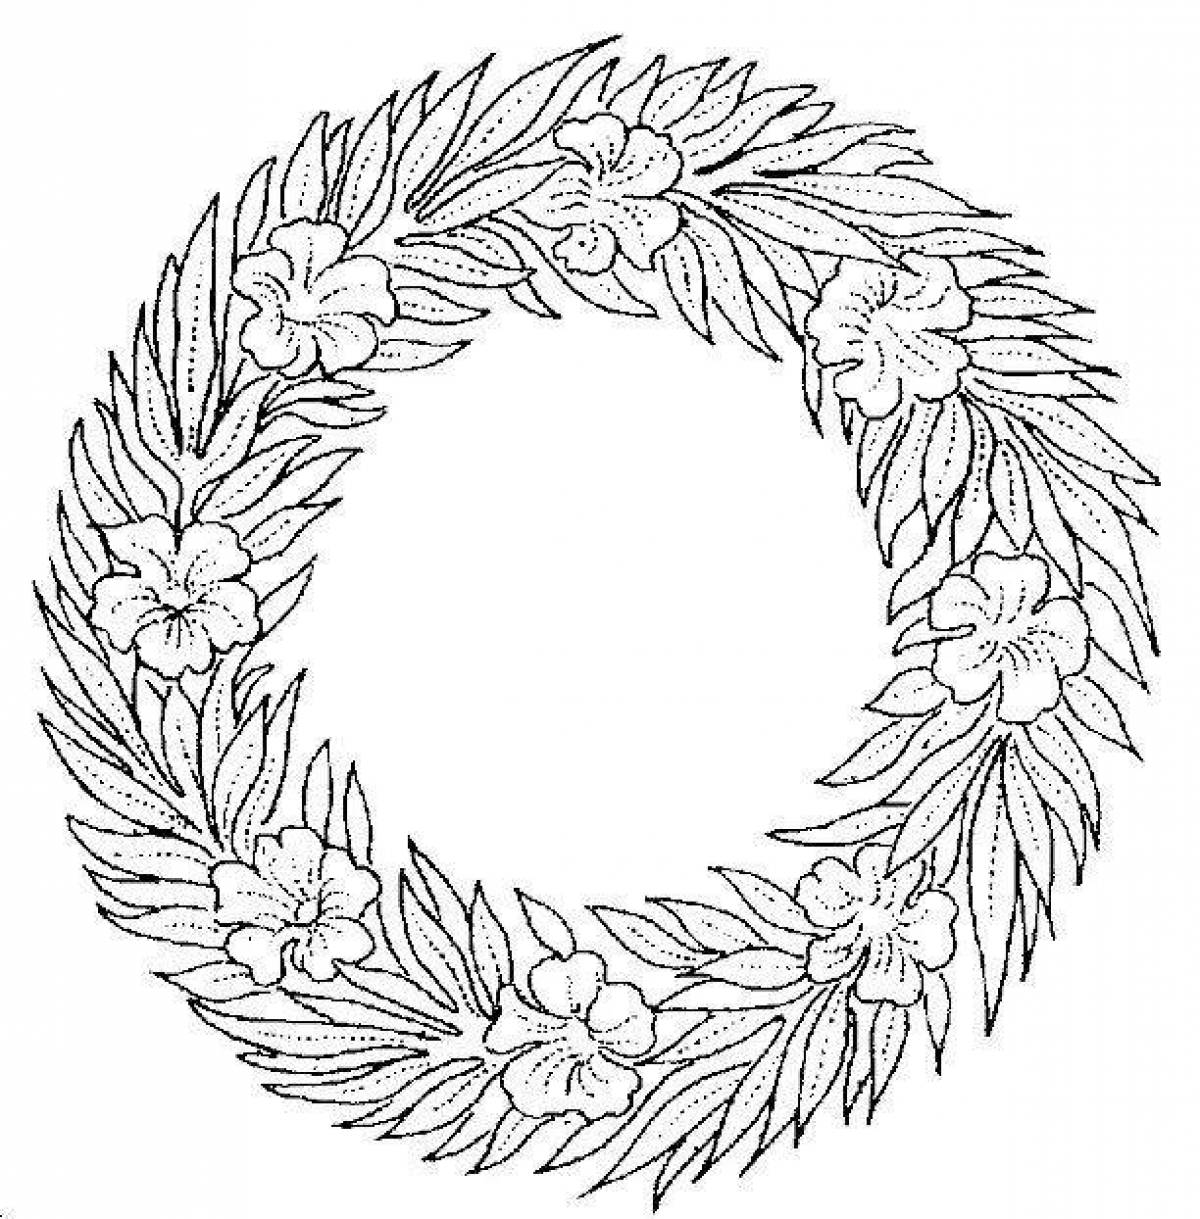 Calm wreath coloring page